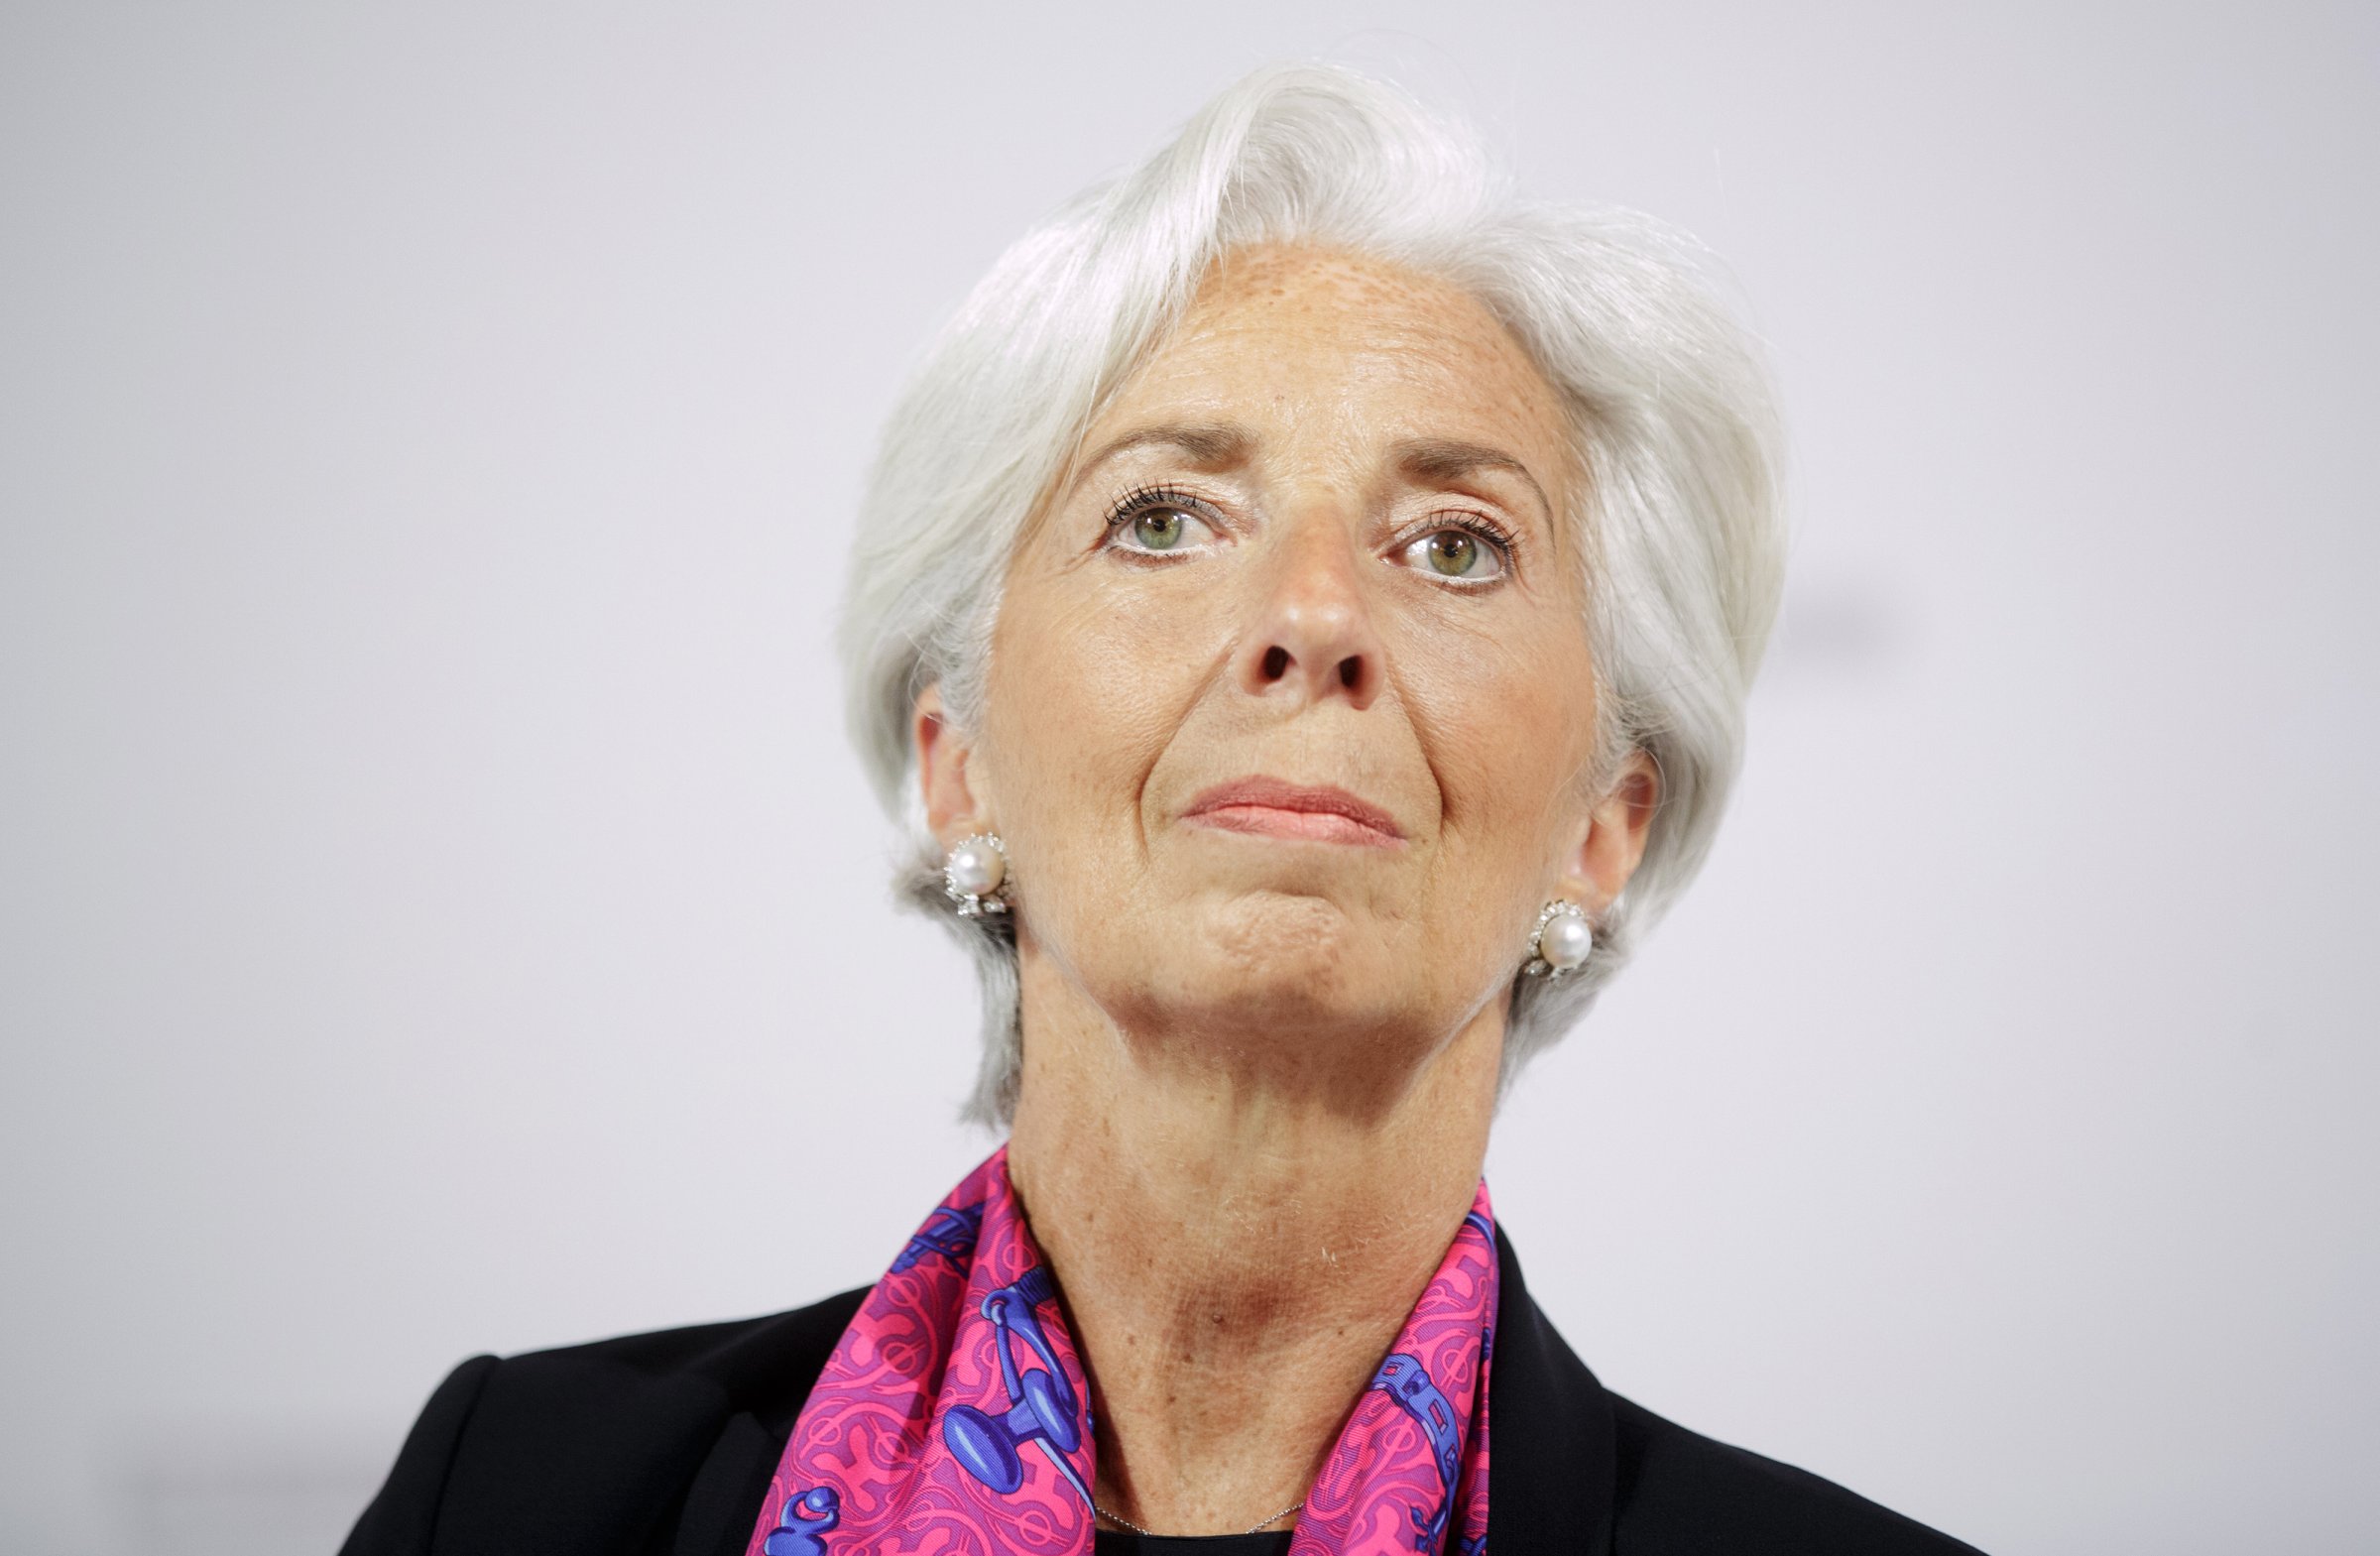 Christine Lagarde, managing director of the International Monetary Fund (IMF), looks on during a panel session at the Hofburg Palace in Vienna, Austria, on Friday, June 17, 2016.